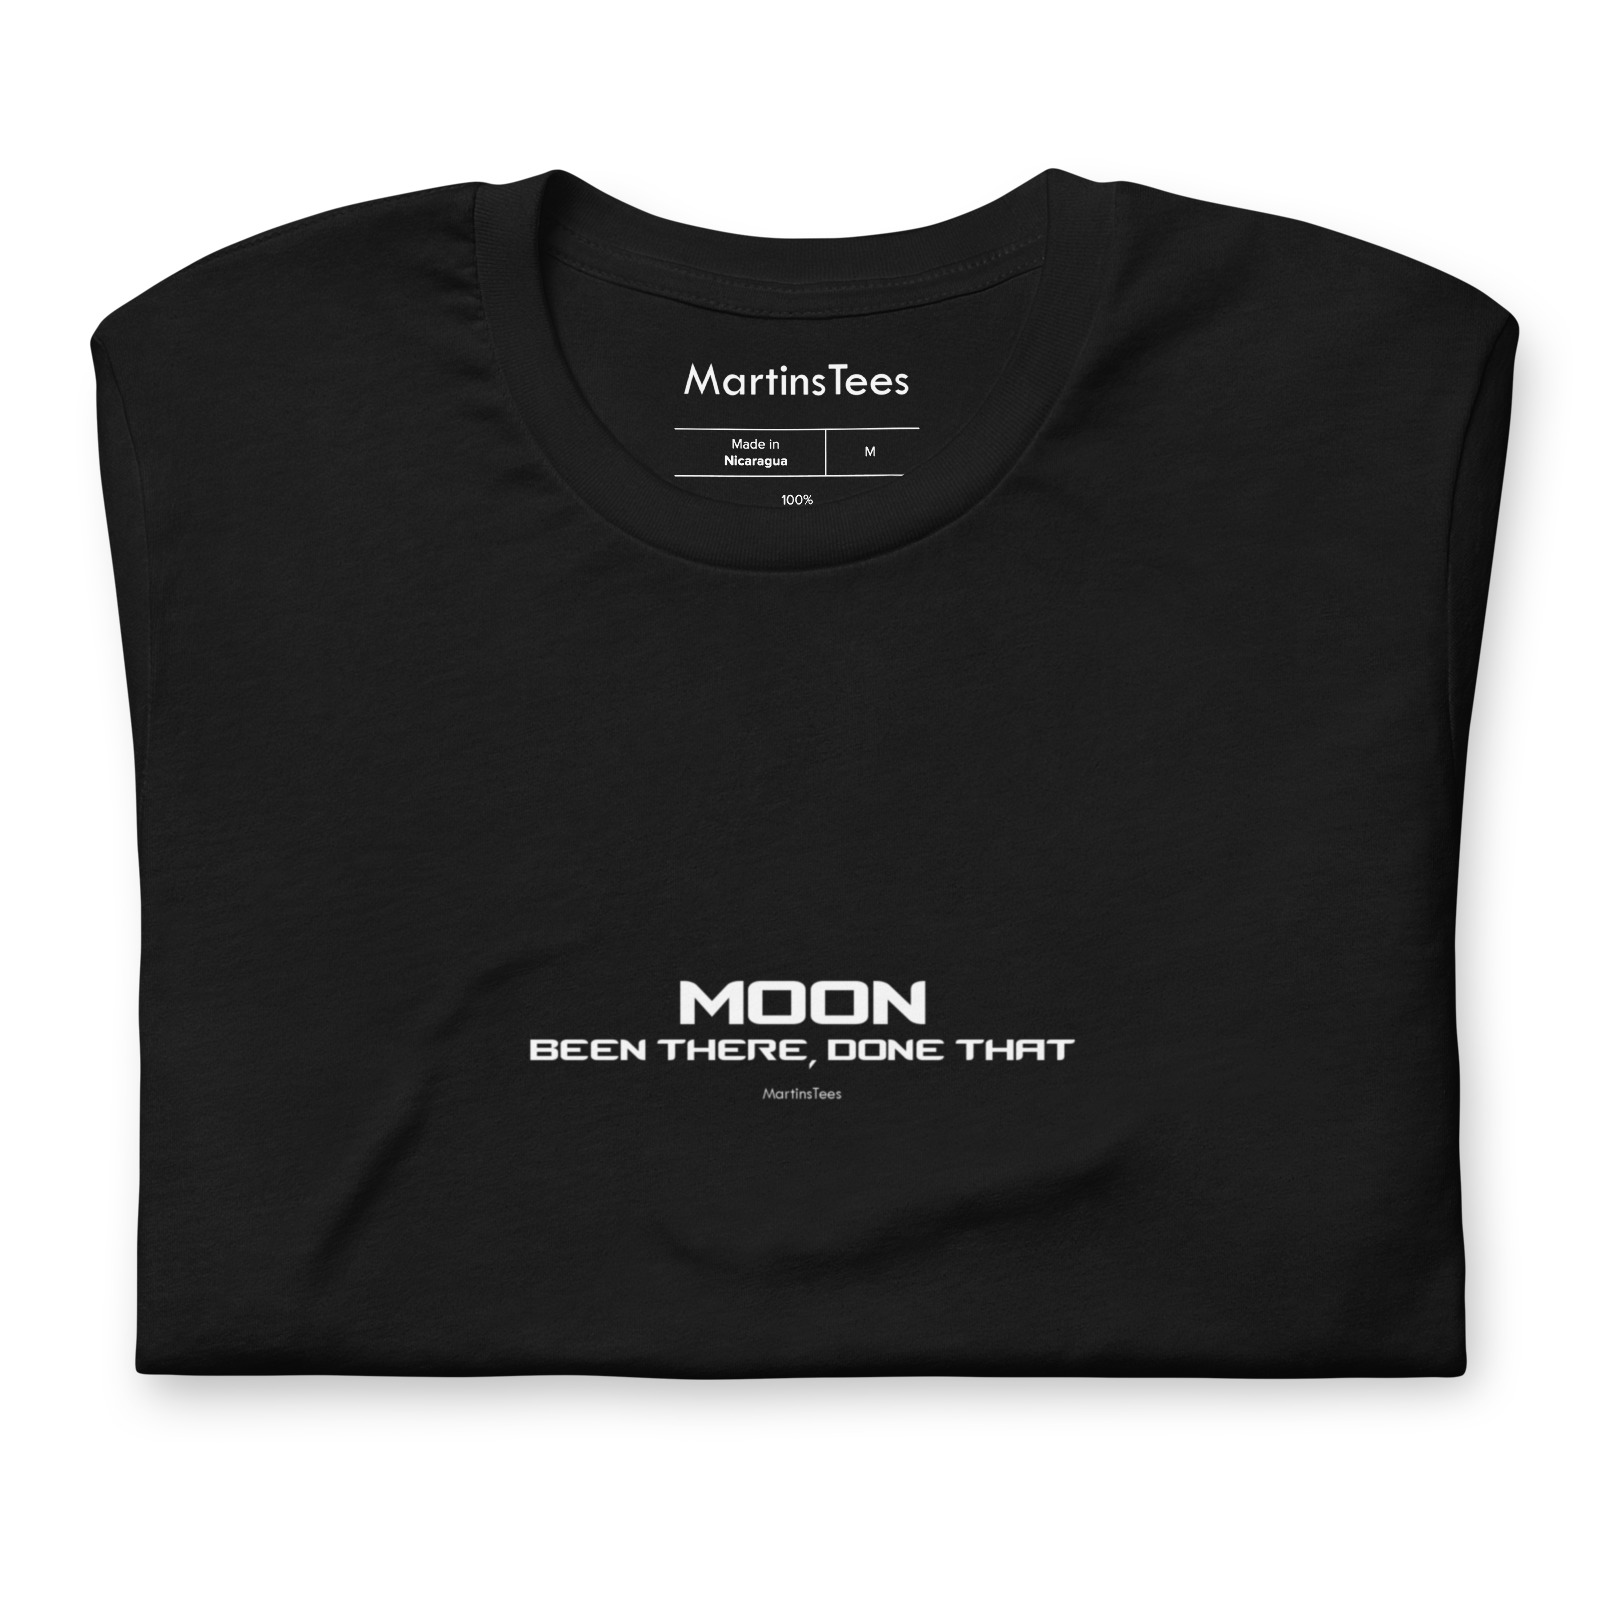 T-shirt: MOON - BEEN THERE, DONE THAT